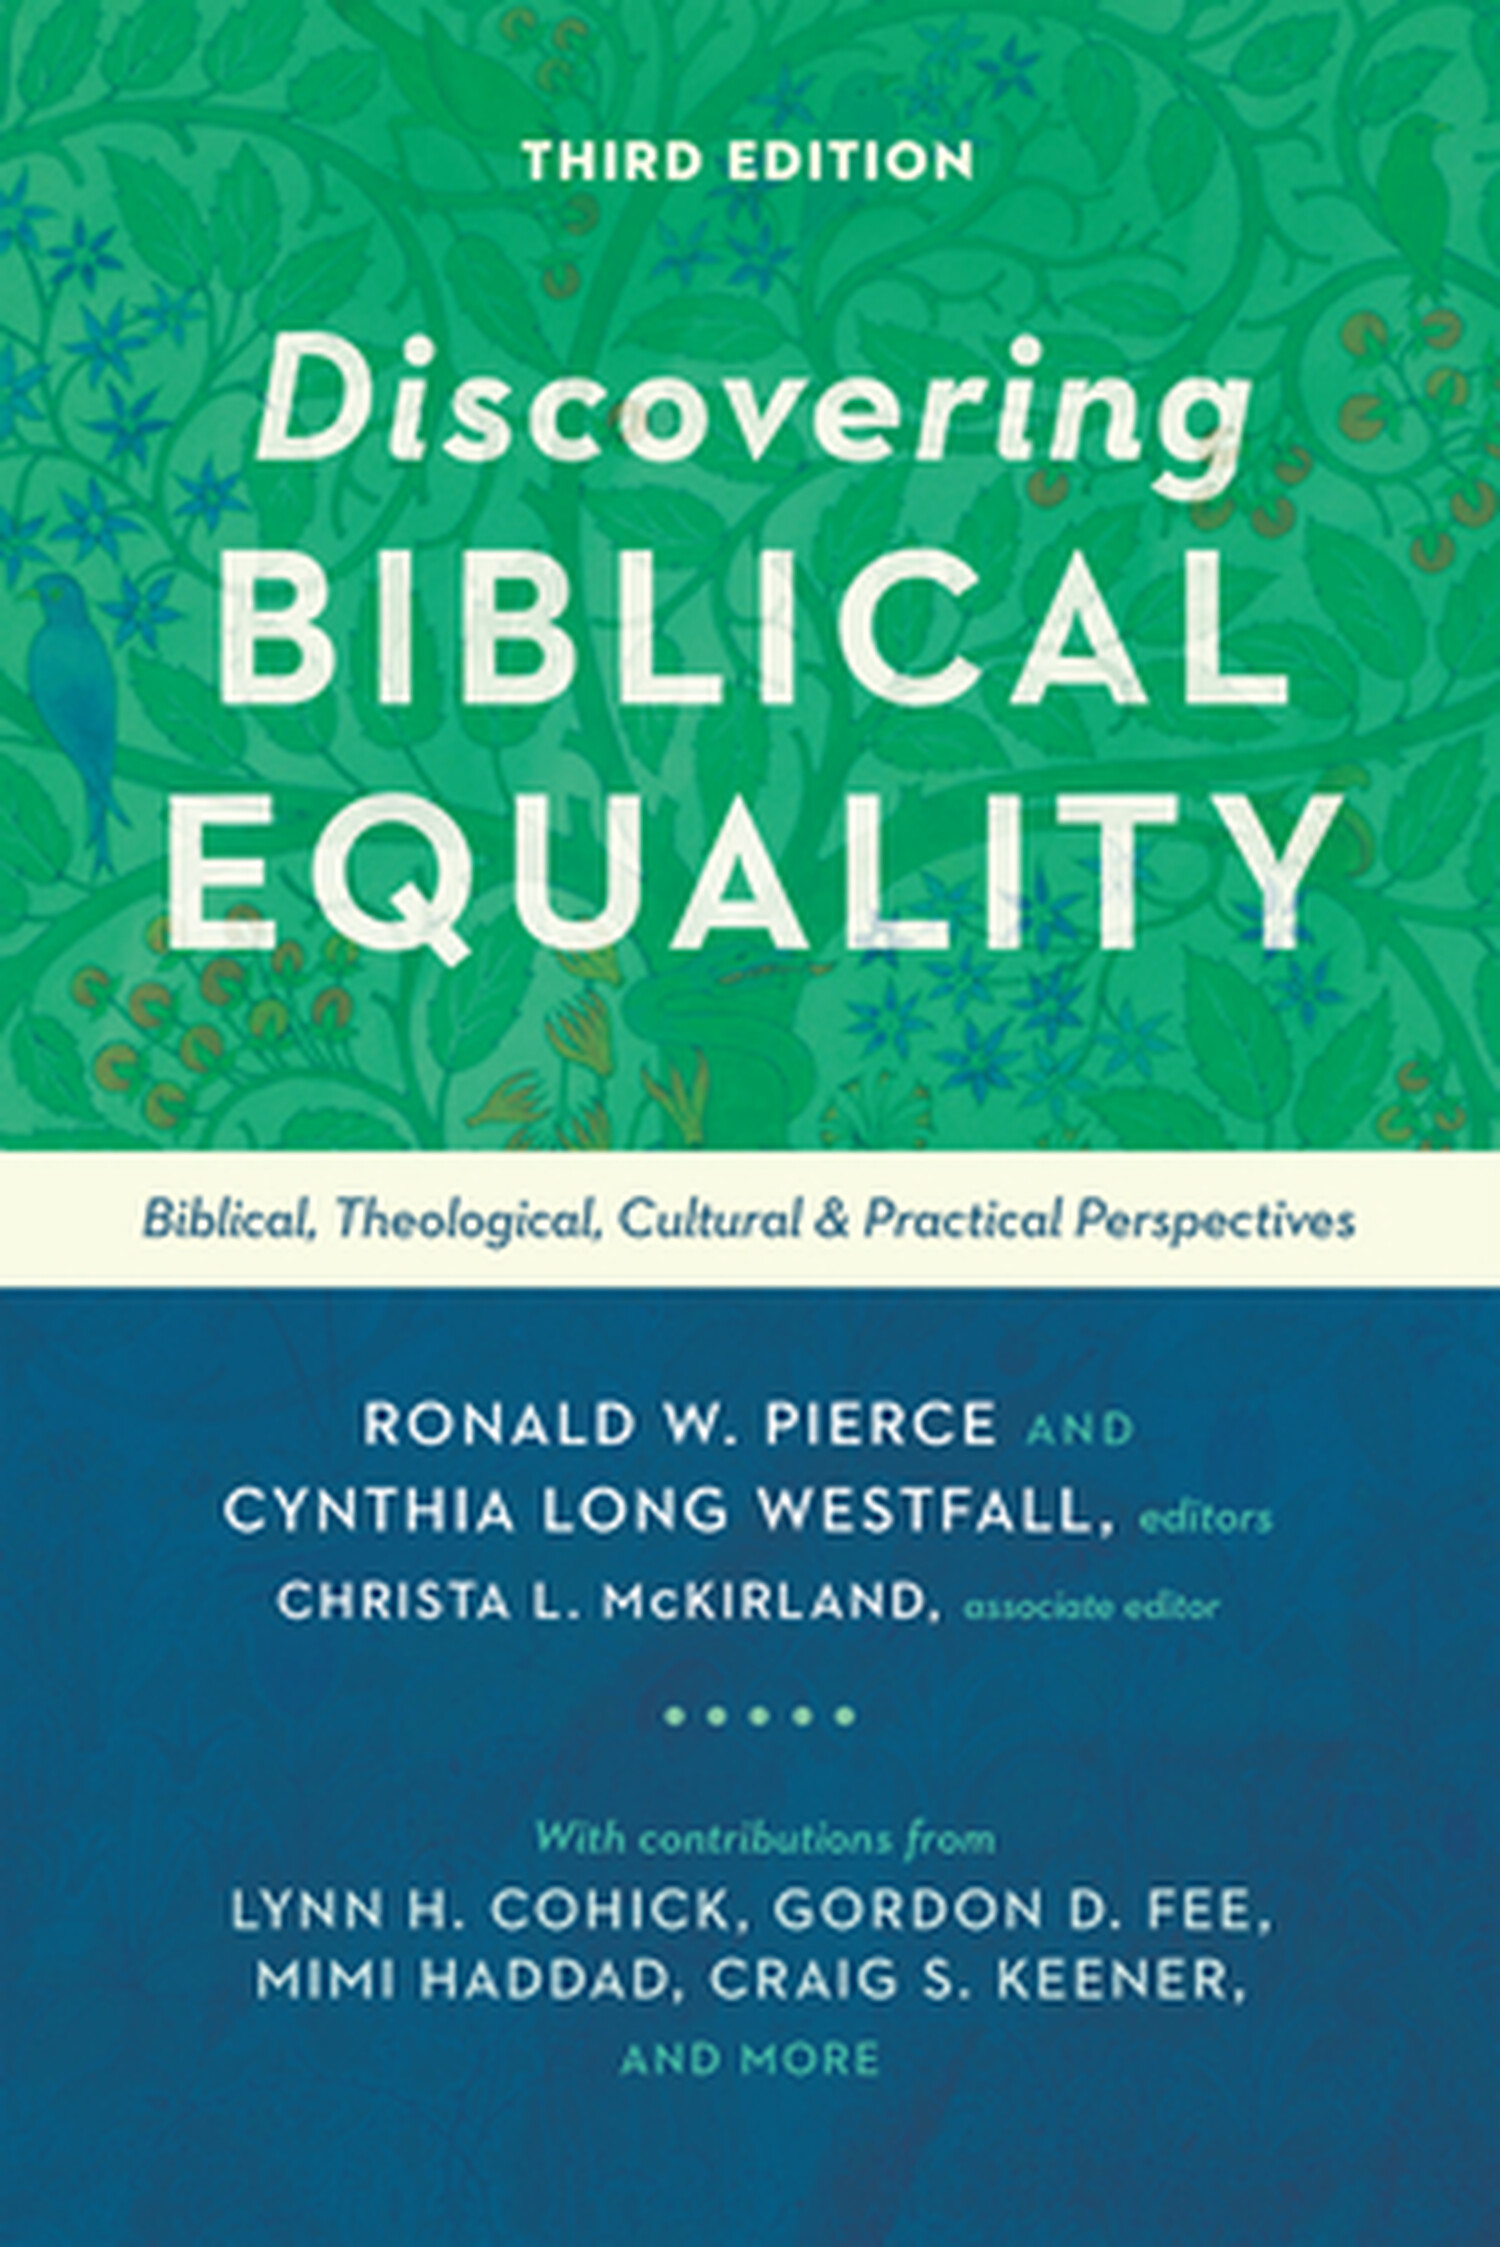 Discover-Biblical-Equality-Cover.jpeg